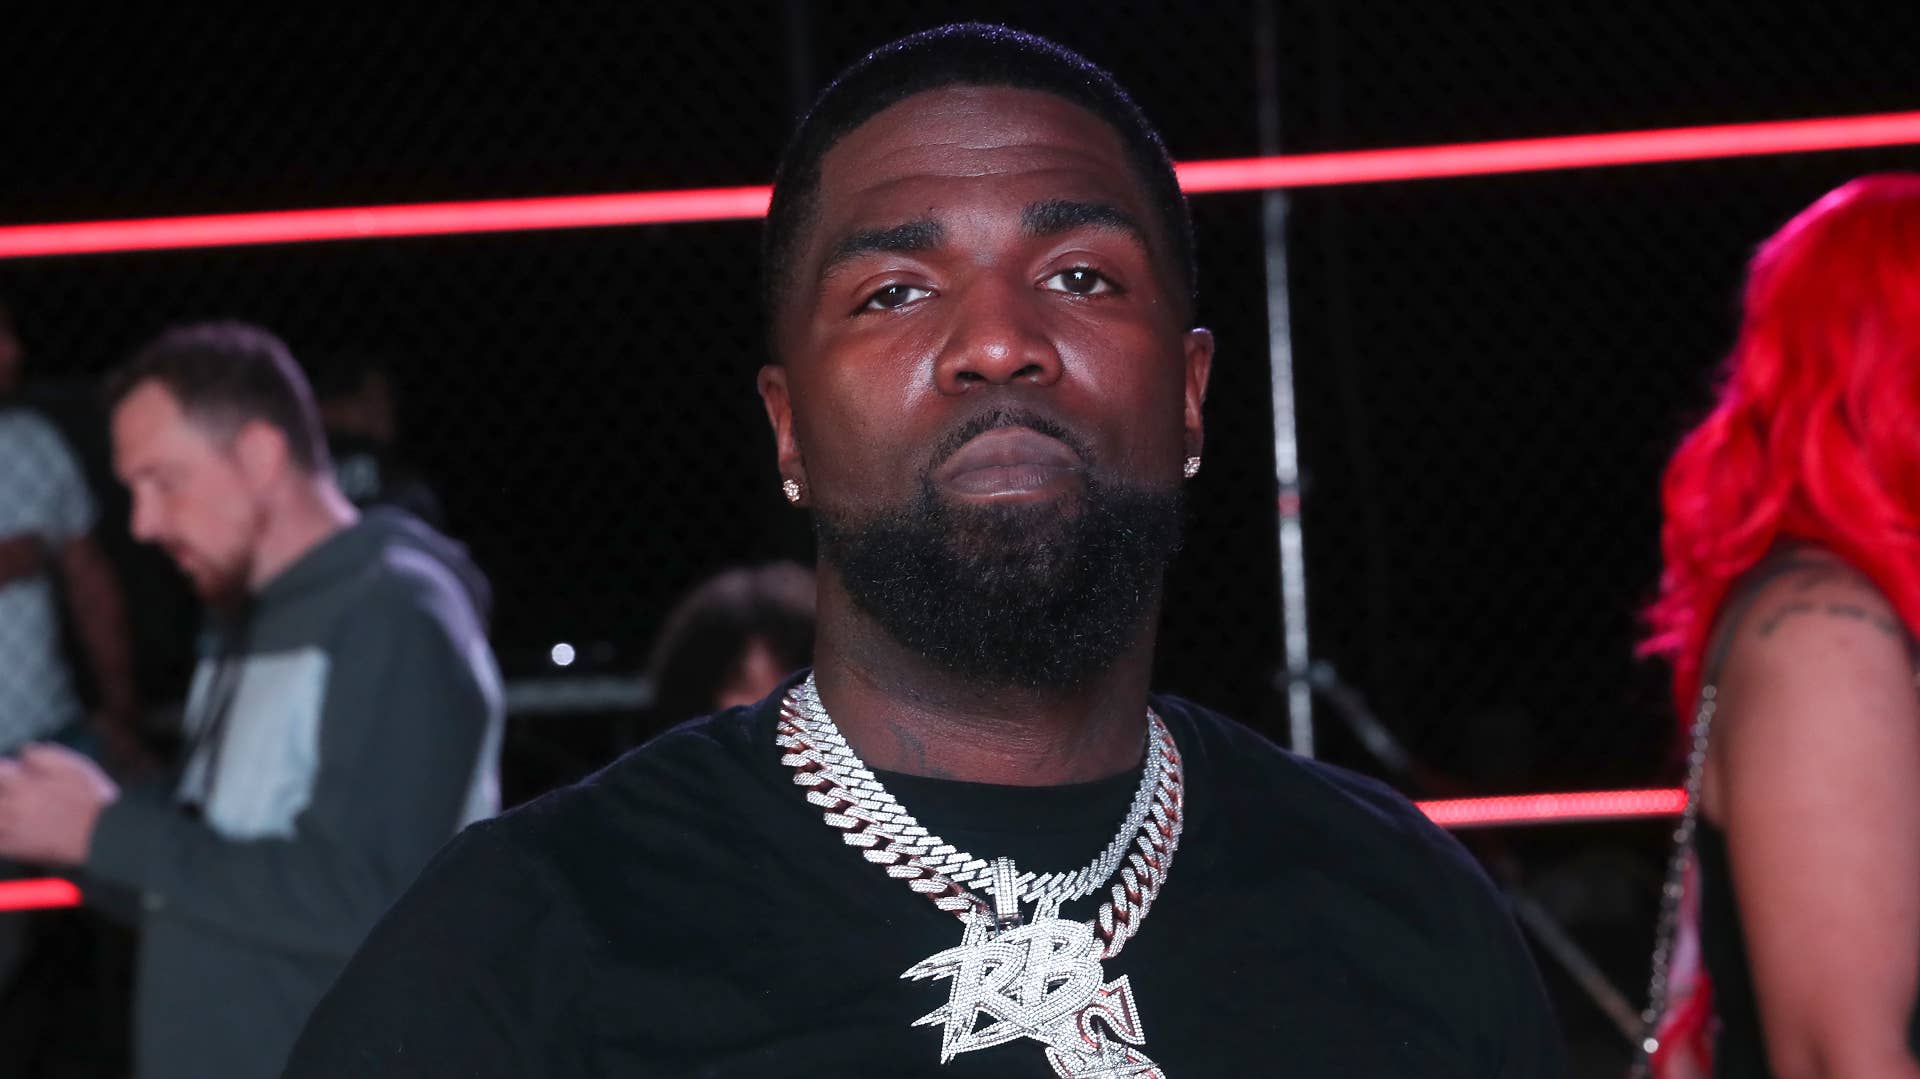 Tsu Surf attends The Ultimate Rap League App Event at Private Residence.